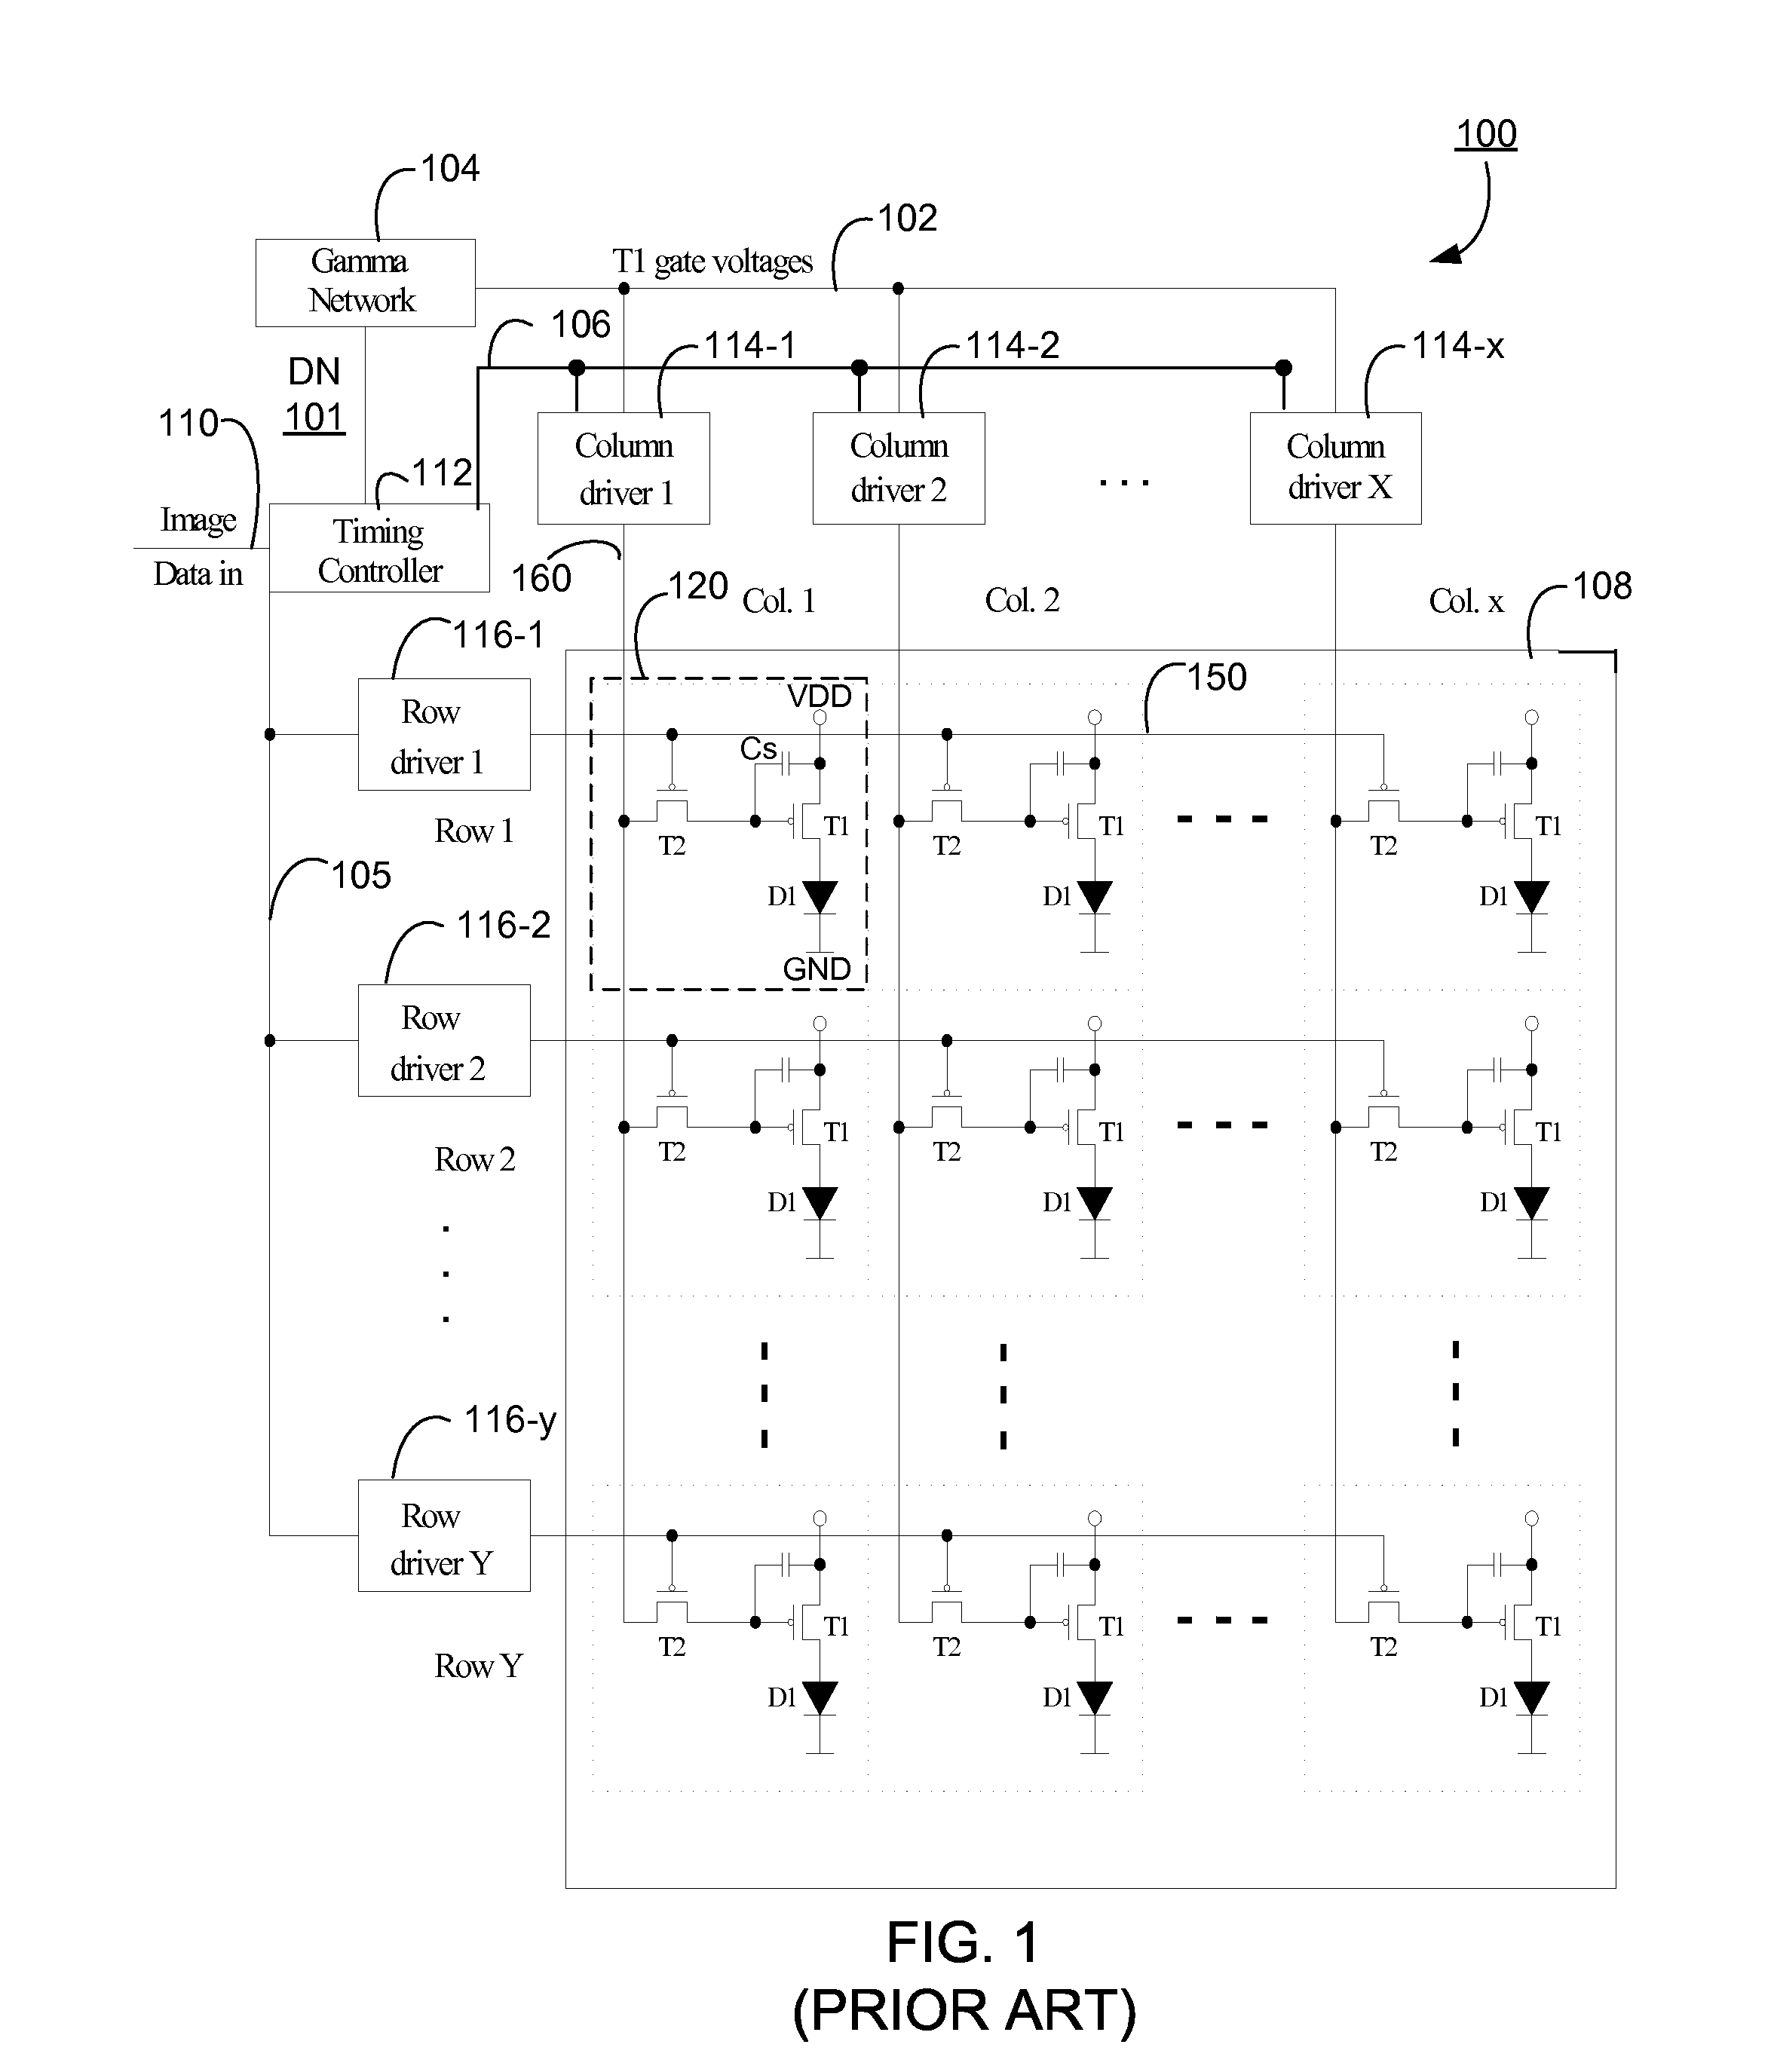 Emission control in aged active matrix OLED display using voltage ratio or current ratio